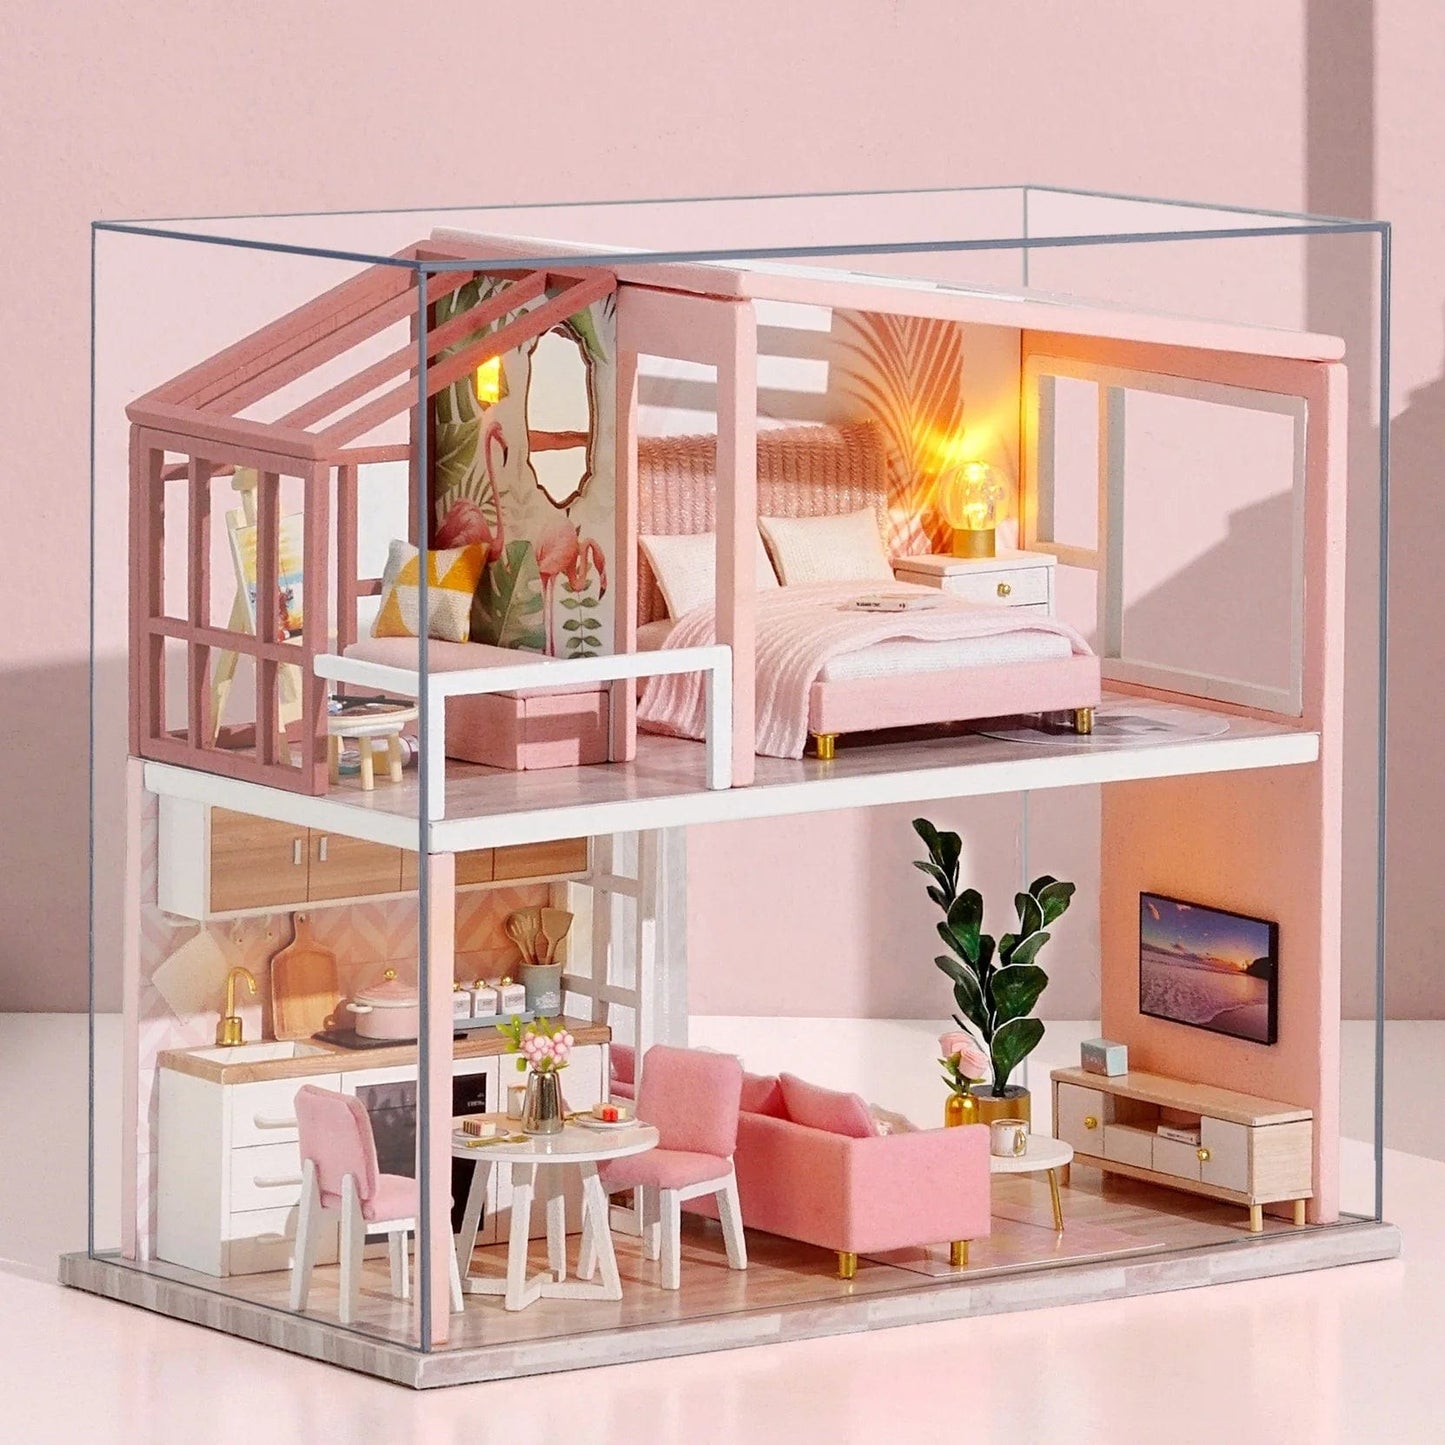 Pièces d'Exceptions Baby House Mini Miniature Doll DIY Small  Kit Making Room Toys, Home Bedroom Decorations with Furniture, Wooden Craft